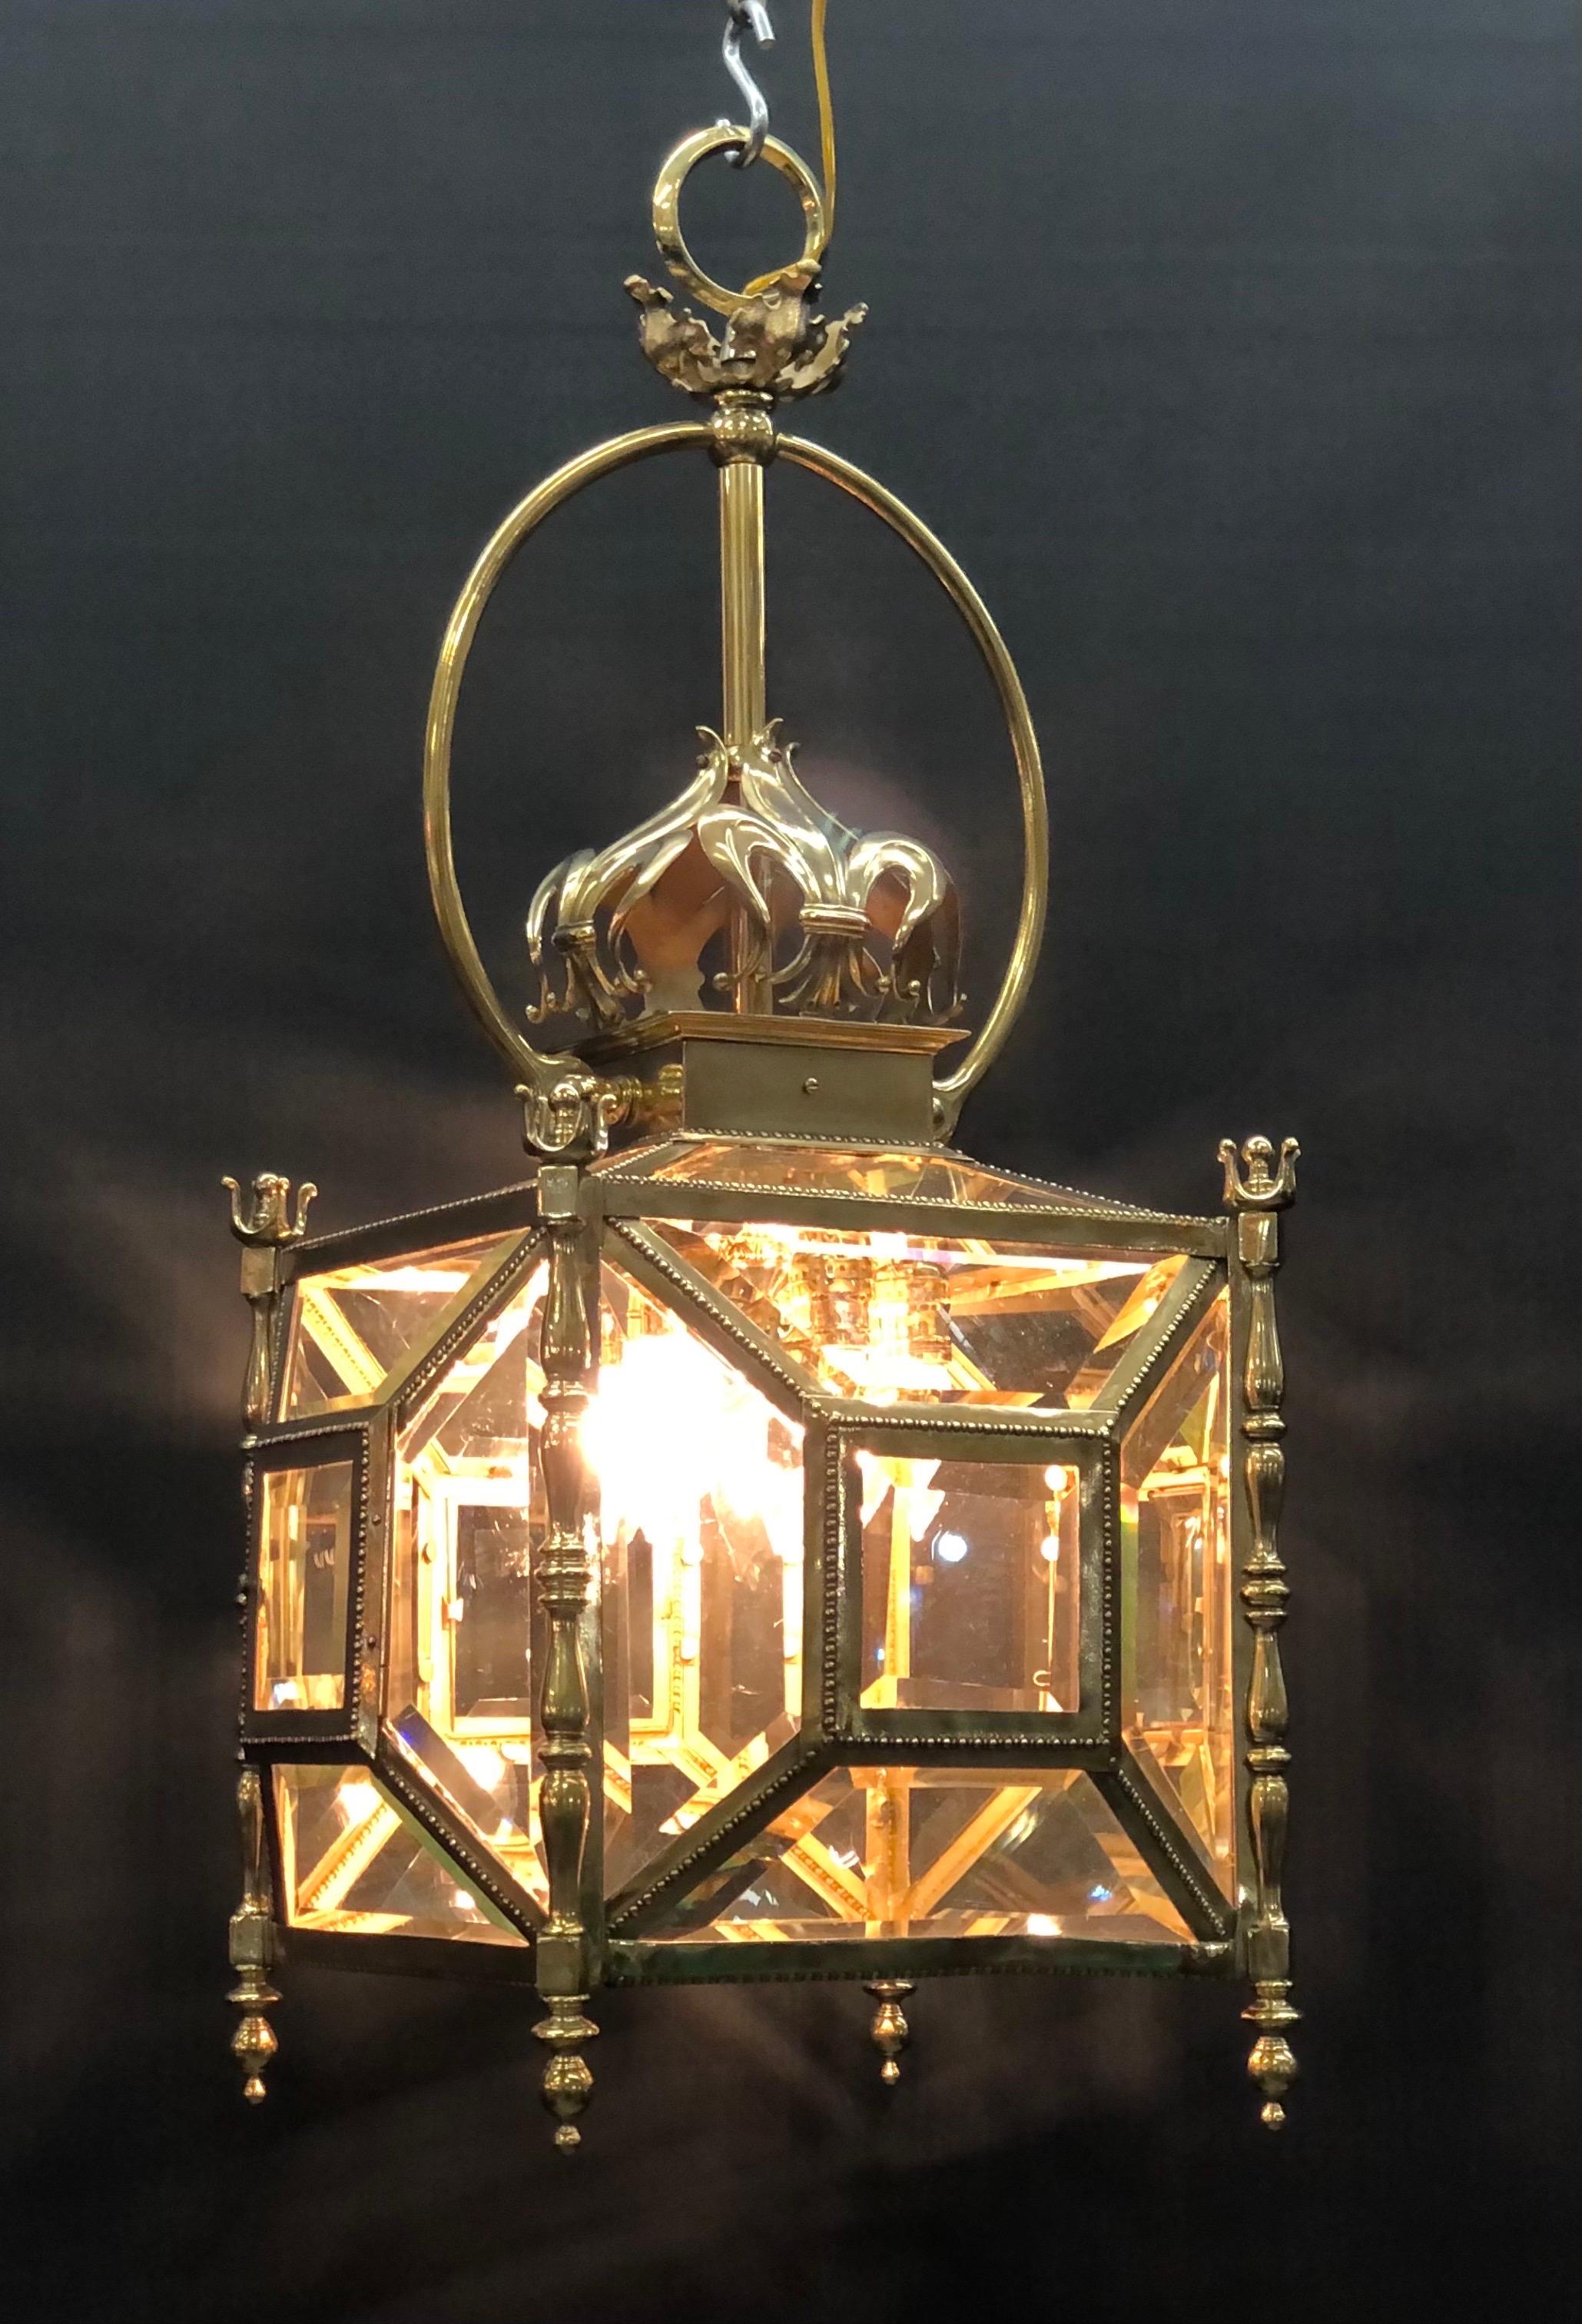 This Neoclassical French Bronze Gasolier Lantern is made of solid cast bronze chased with fine bronze casting still retaining the original geometric beveled glass panels. This Regency Style Lantern has the original bronze Yoke mounted on each side